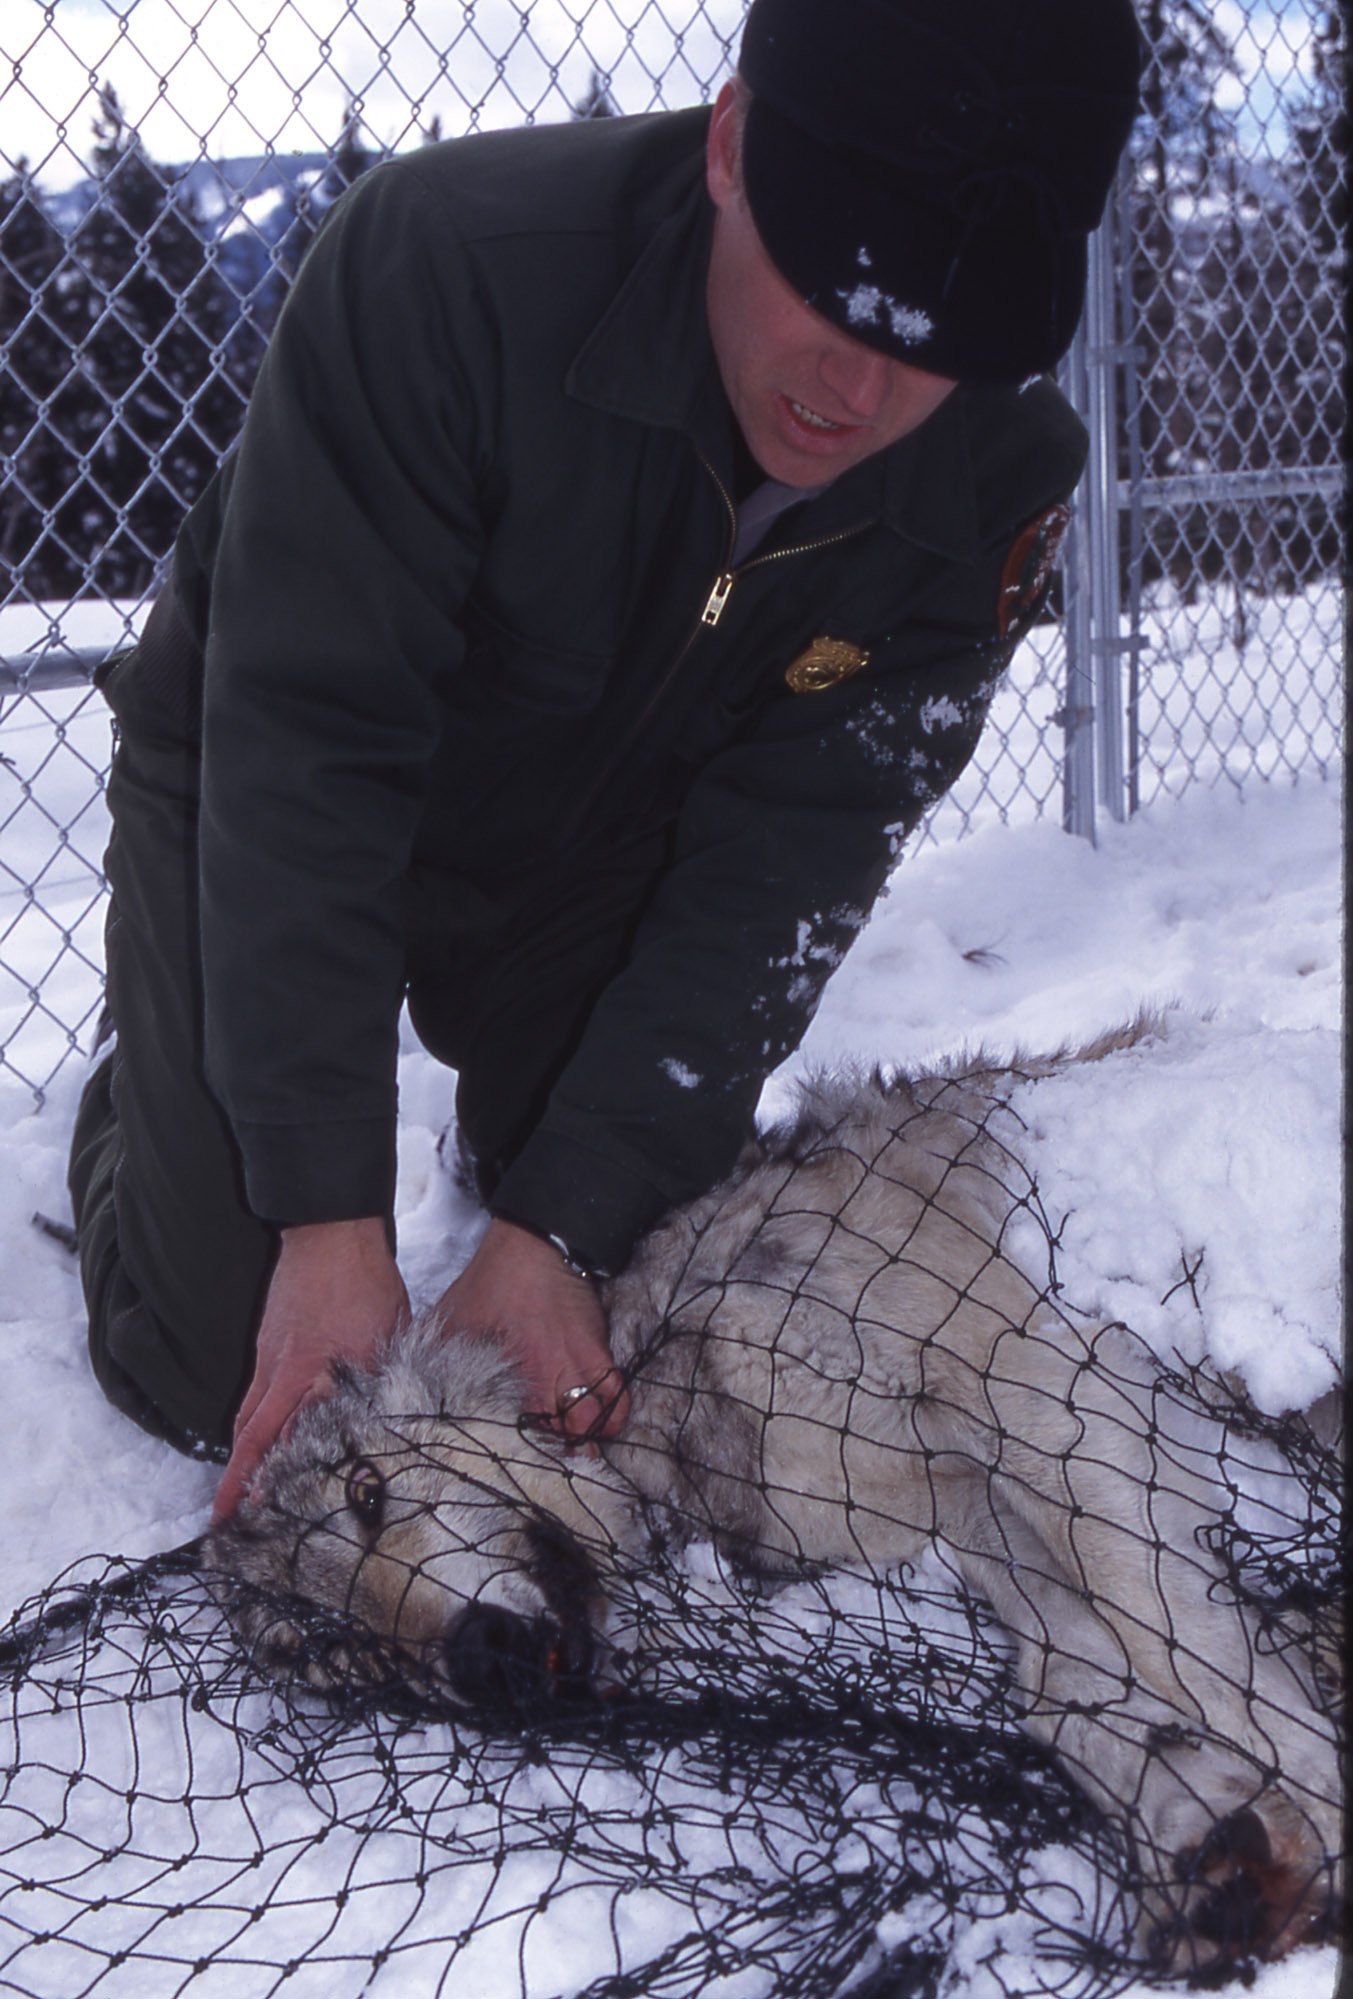 Mike Phillips handling a wolf at the Rose Creek pen. (Photo Jim Peaco/NPS.)